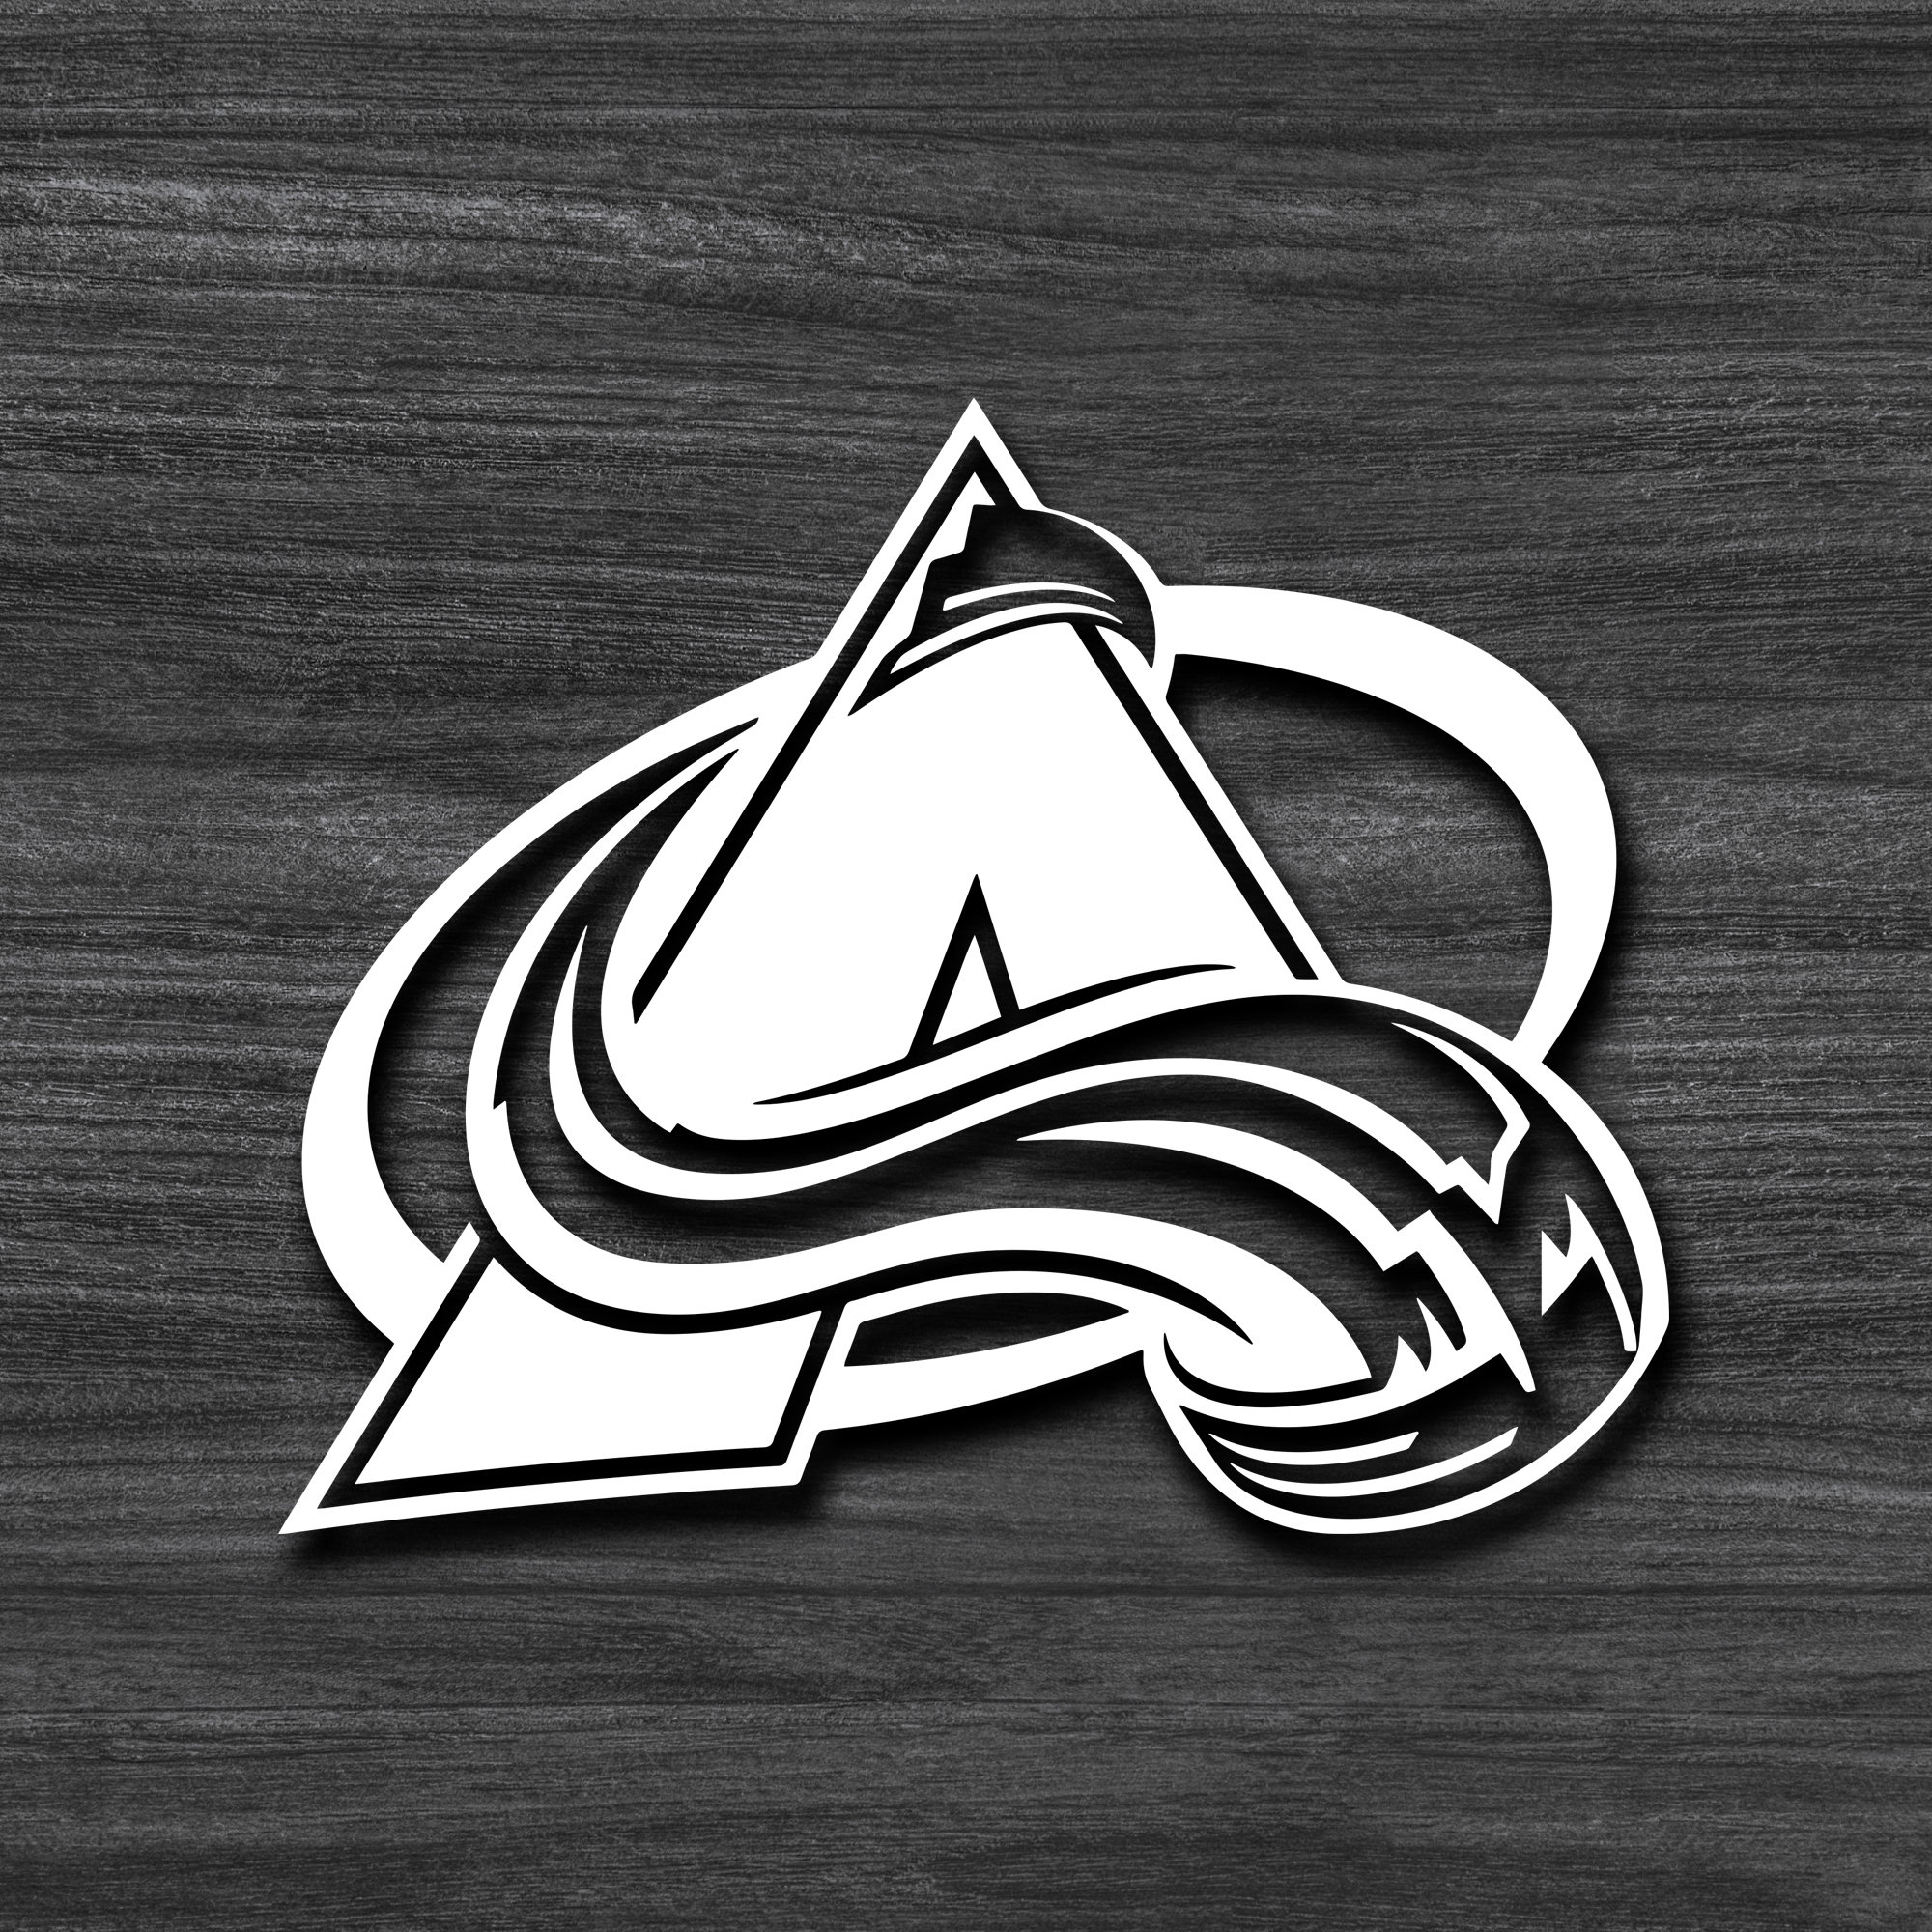 Colorado Avalanche Car Accessories , Avalanche Auto Accessories, Decals,  Clings, Keychains, License Plates